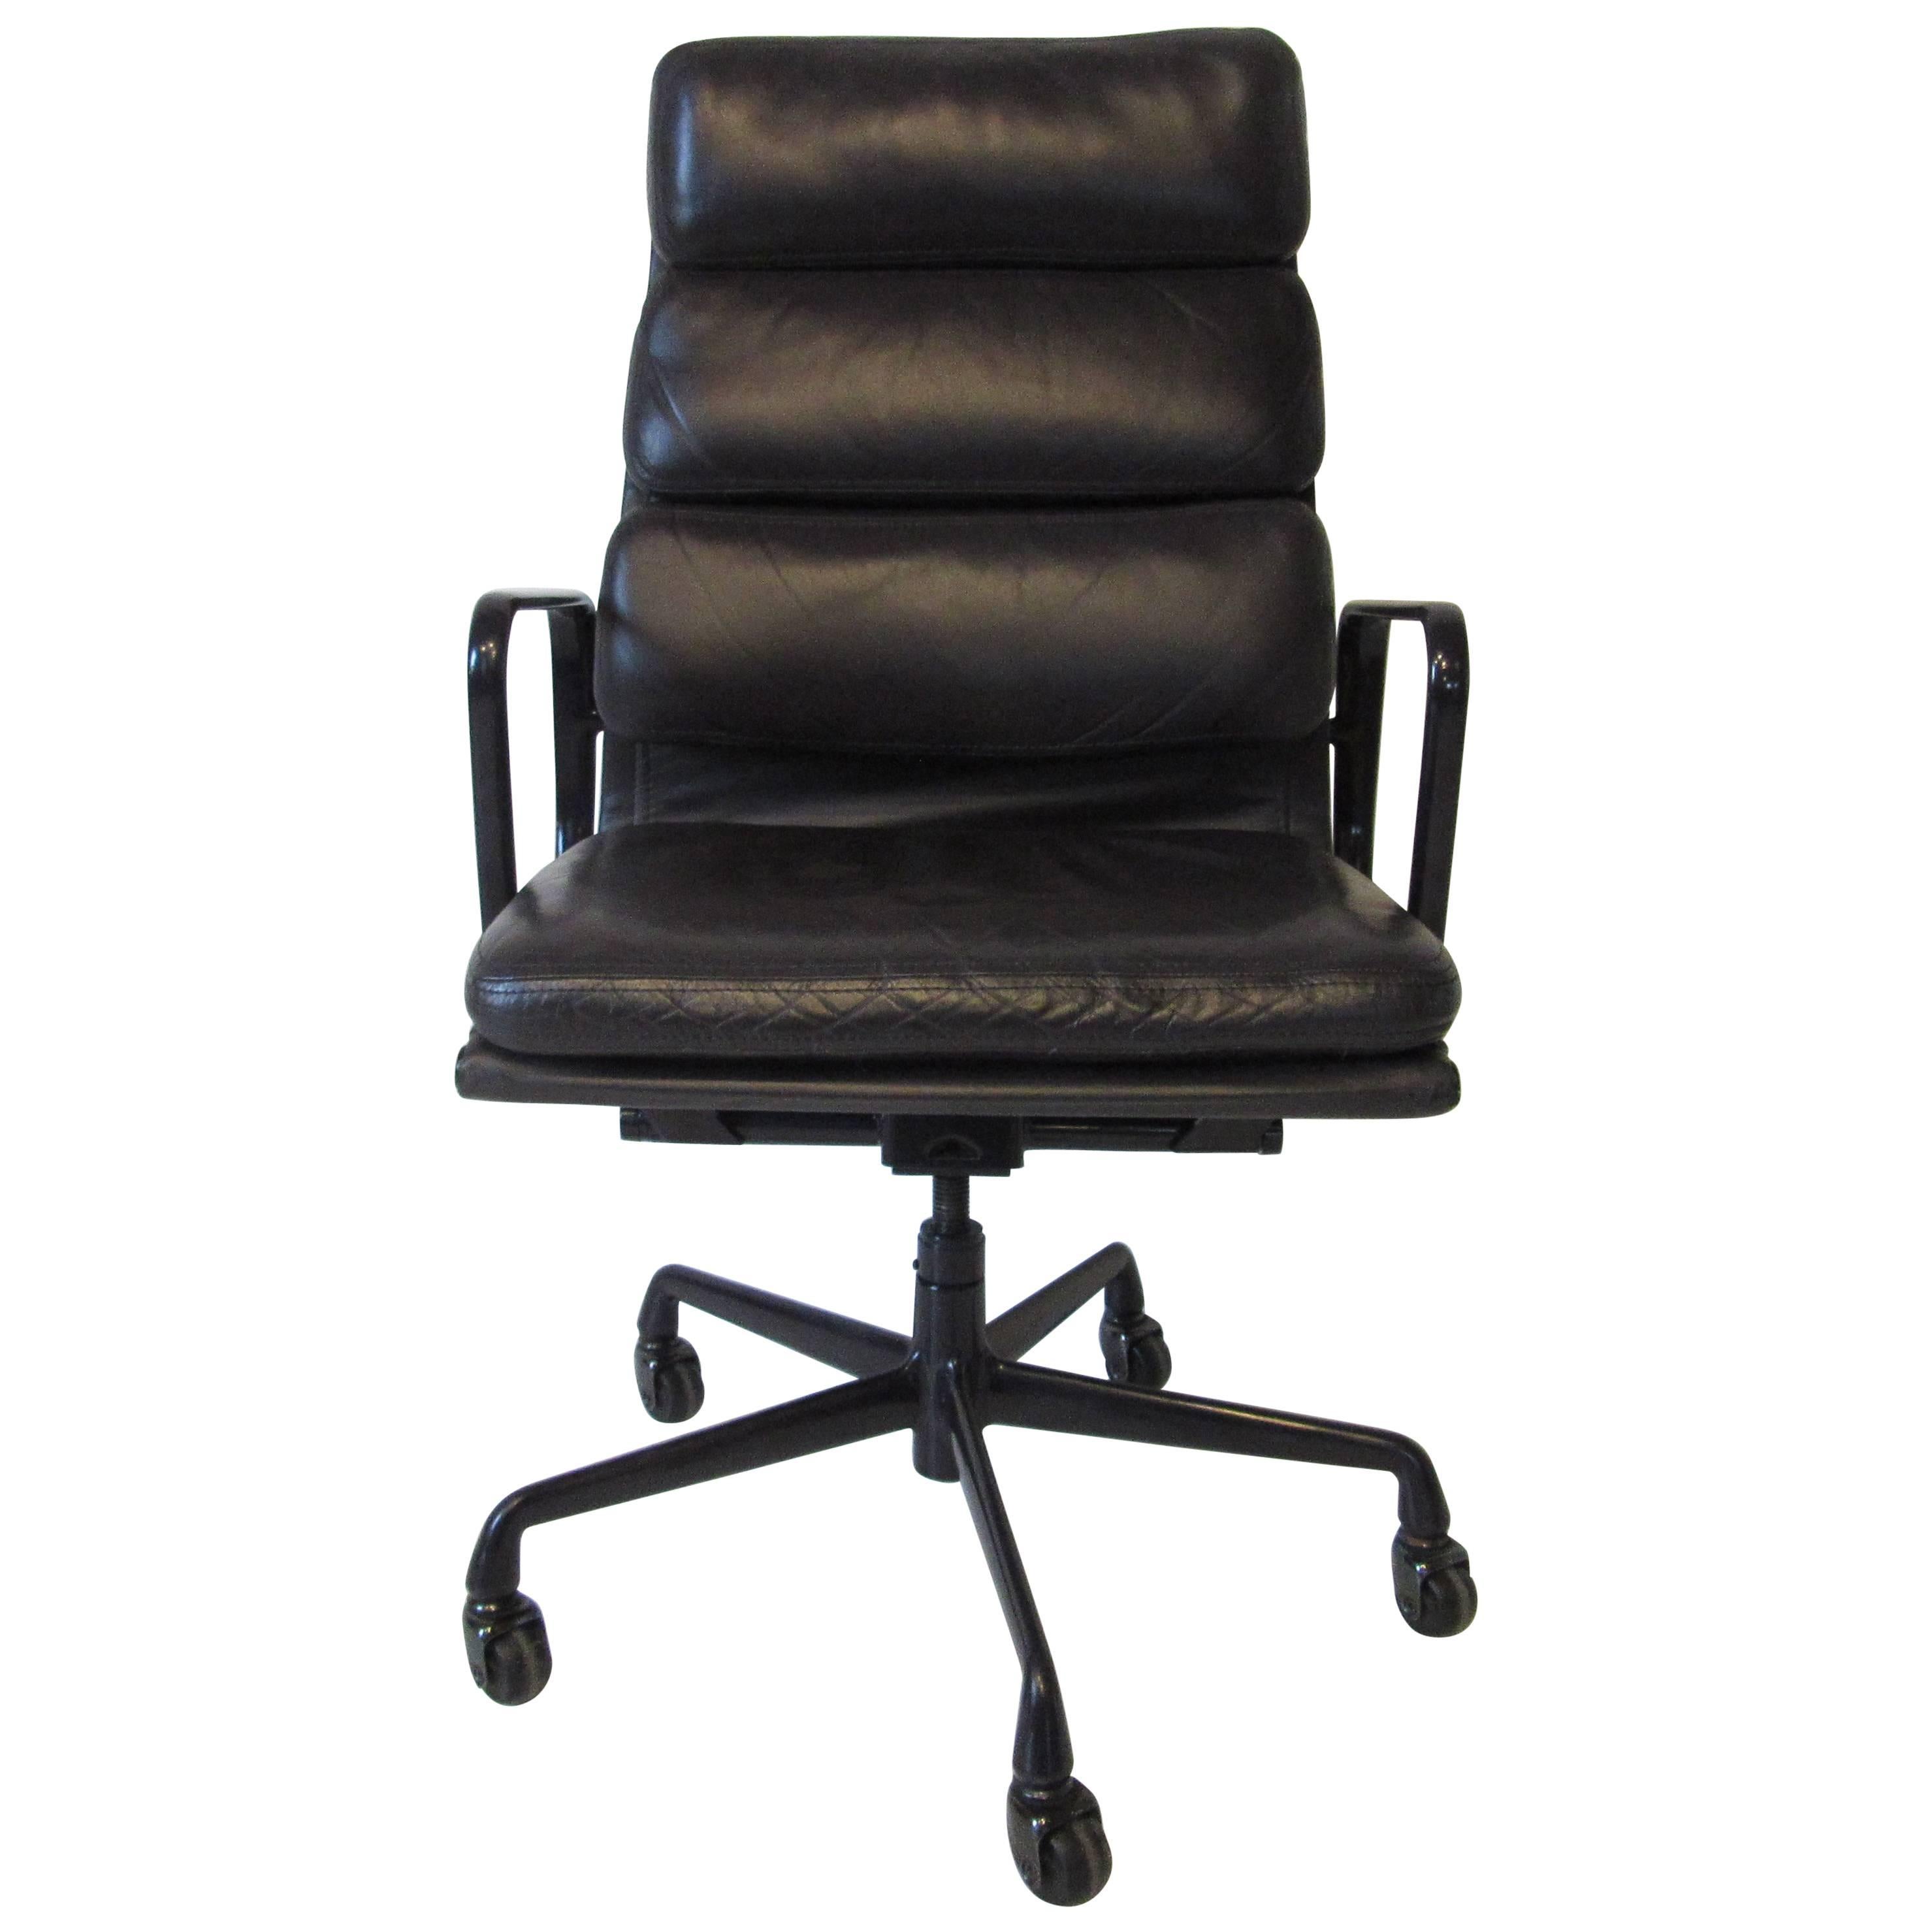 Eames Soft Pad Aluminium Group Executive Chair in Dark Eggplant by Herman Miller